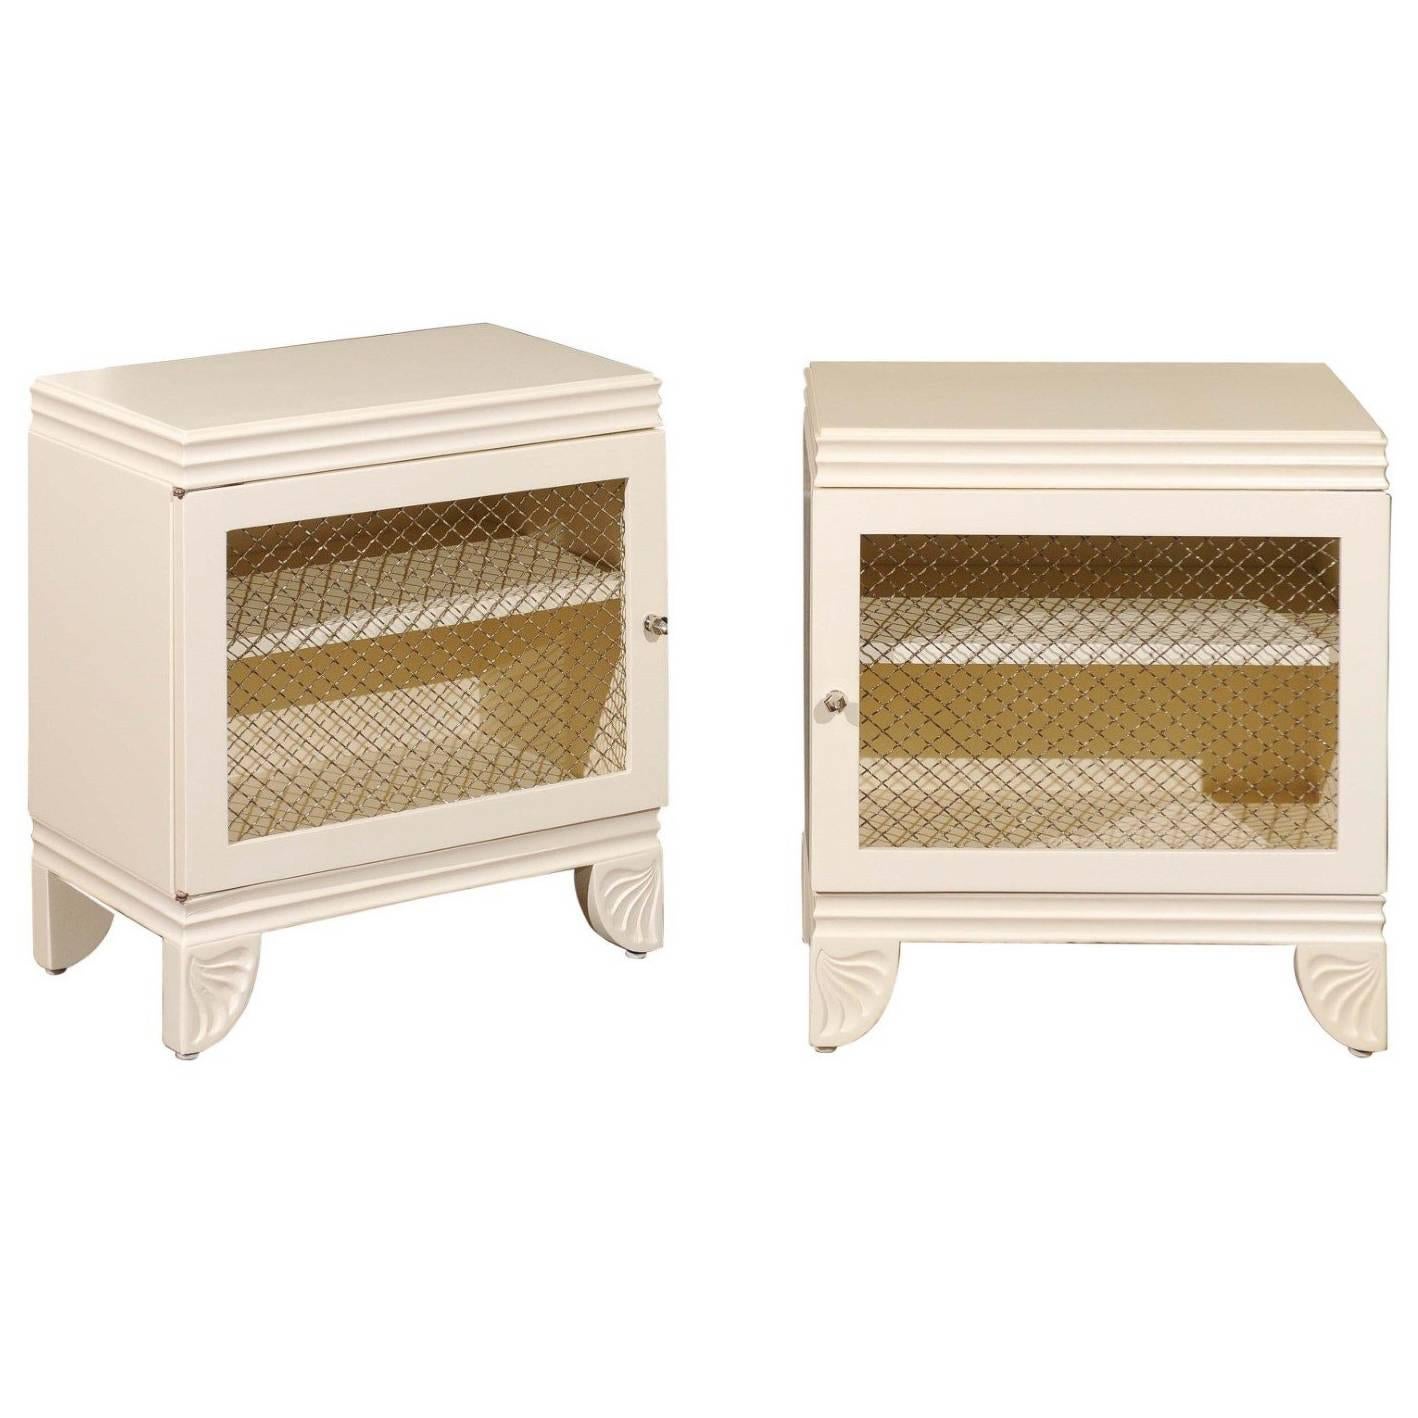 Gorgeous Restored Pair of End Tables by Widdicomb in Cream Lacquer, circa 1938